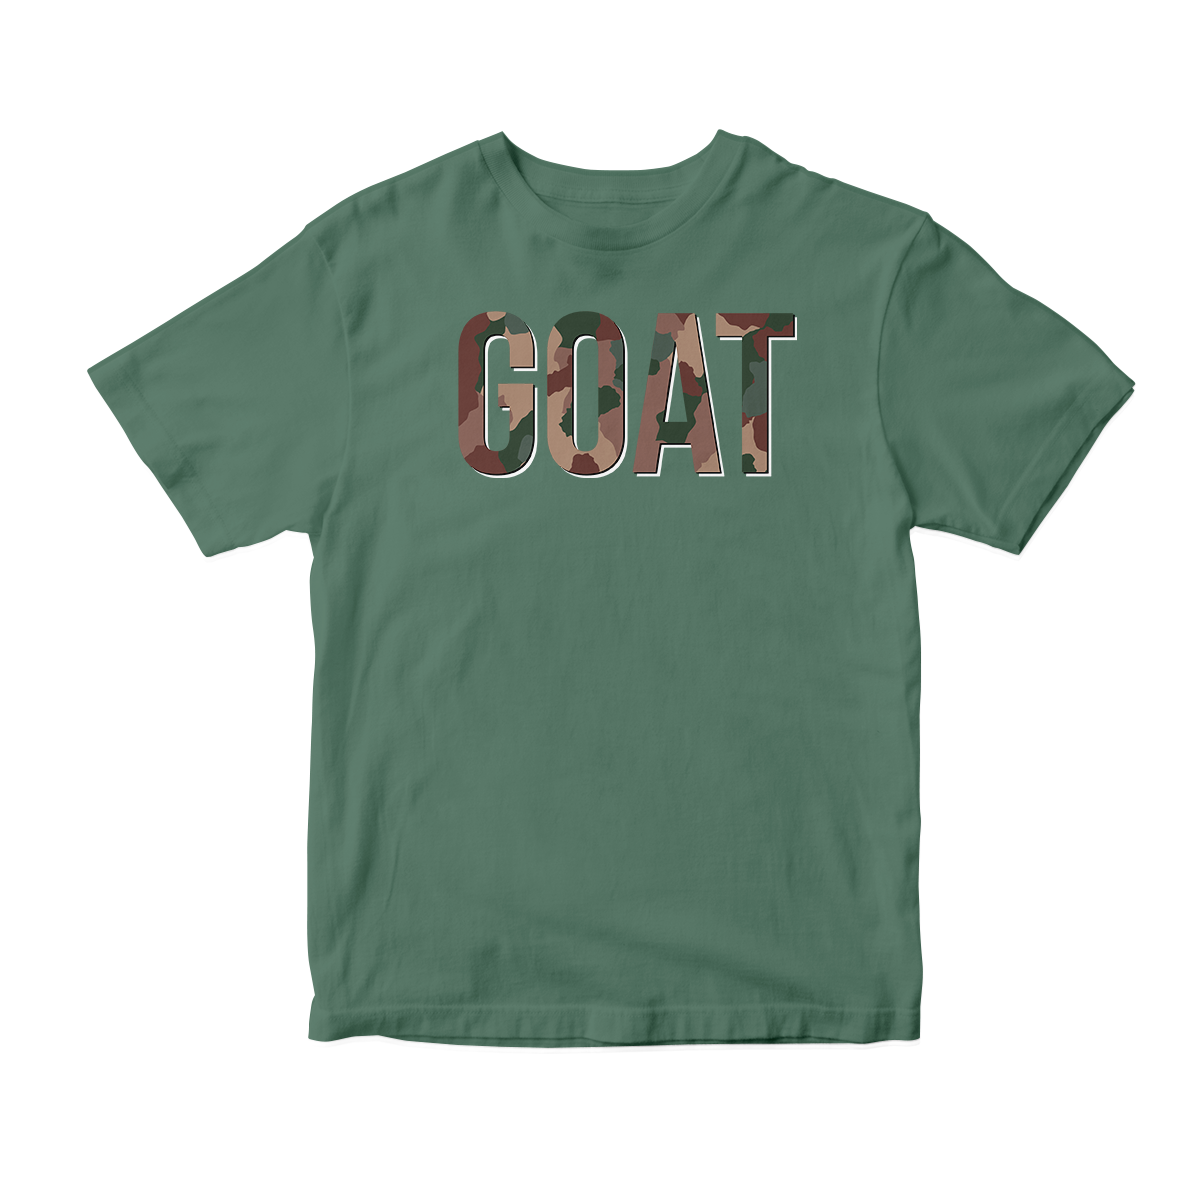 'GOAT' in Woodland CW Short Sleeve Tee